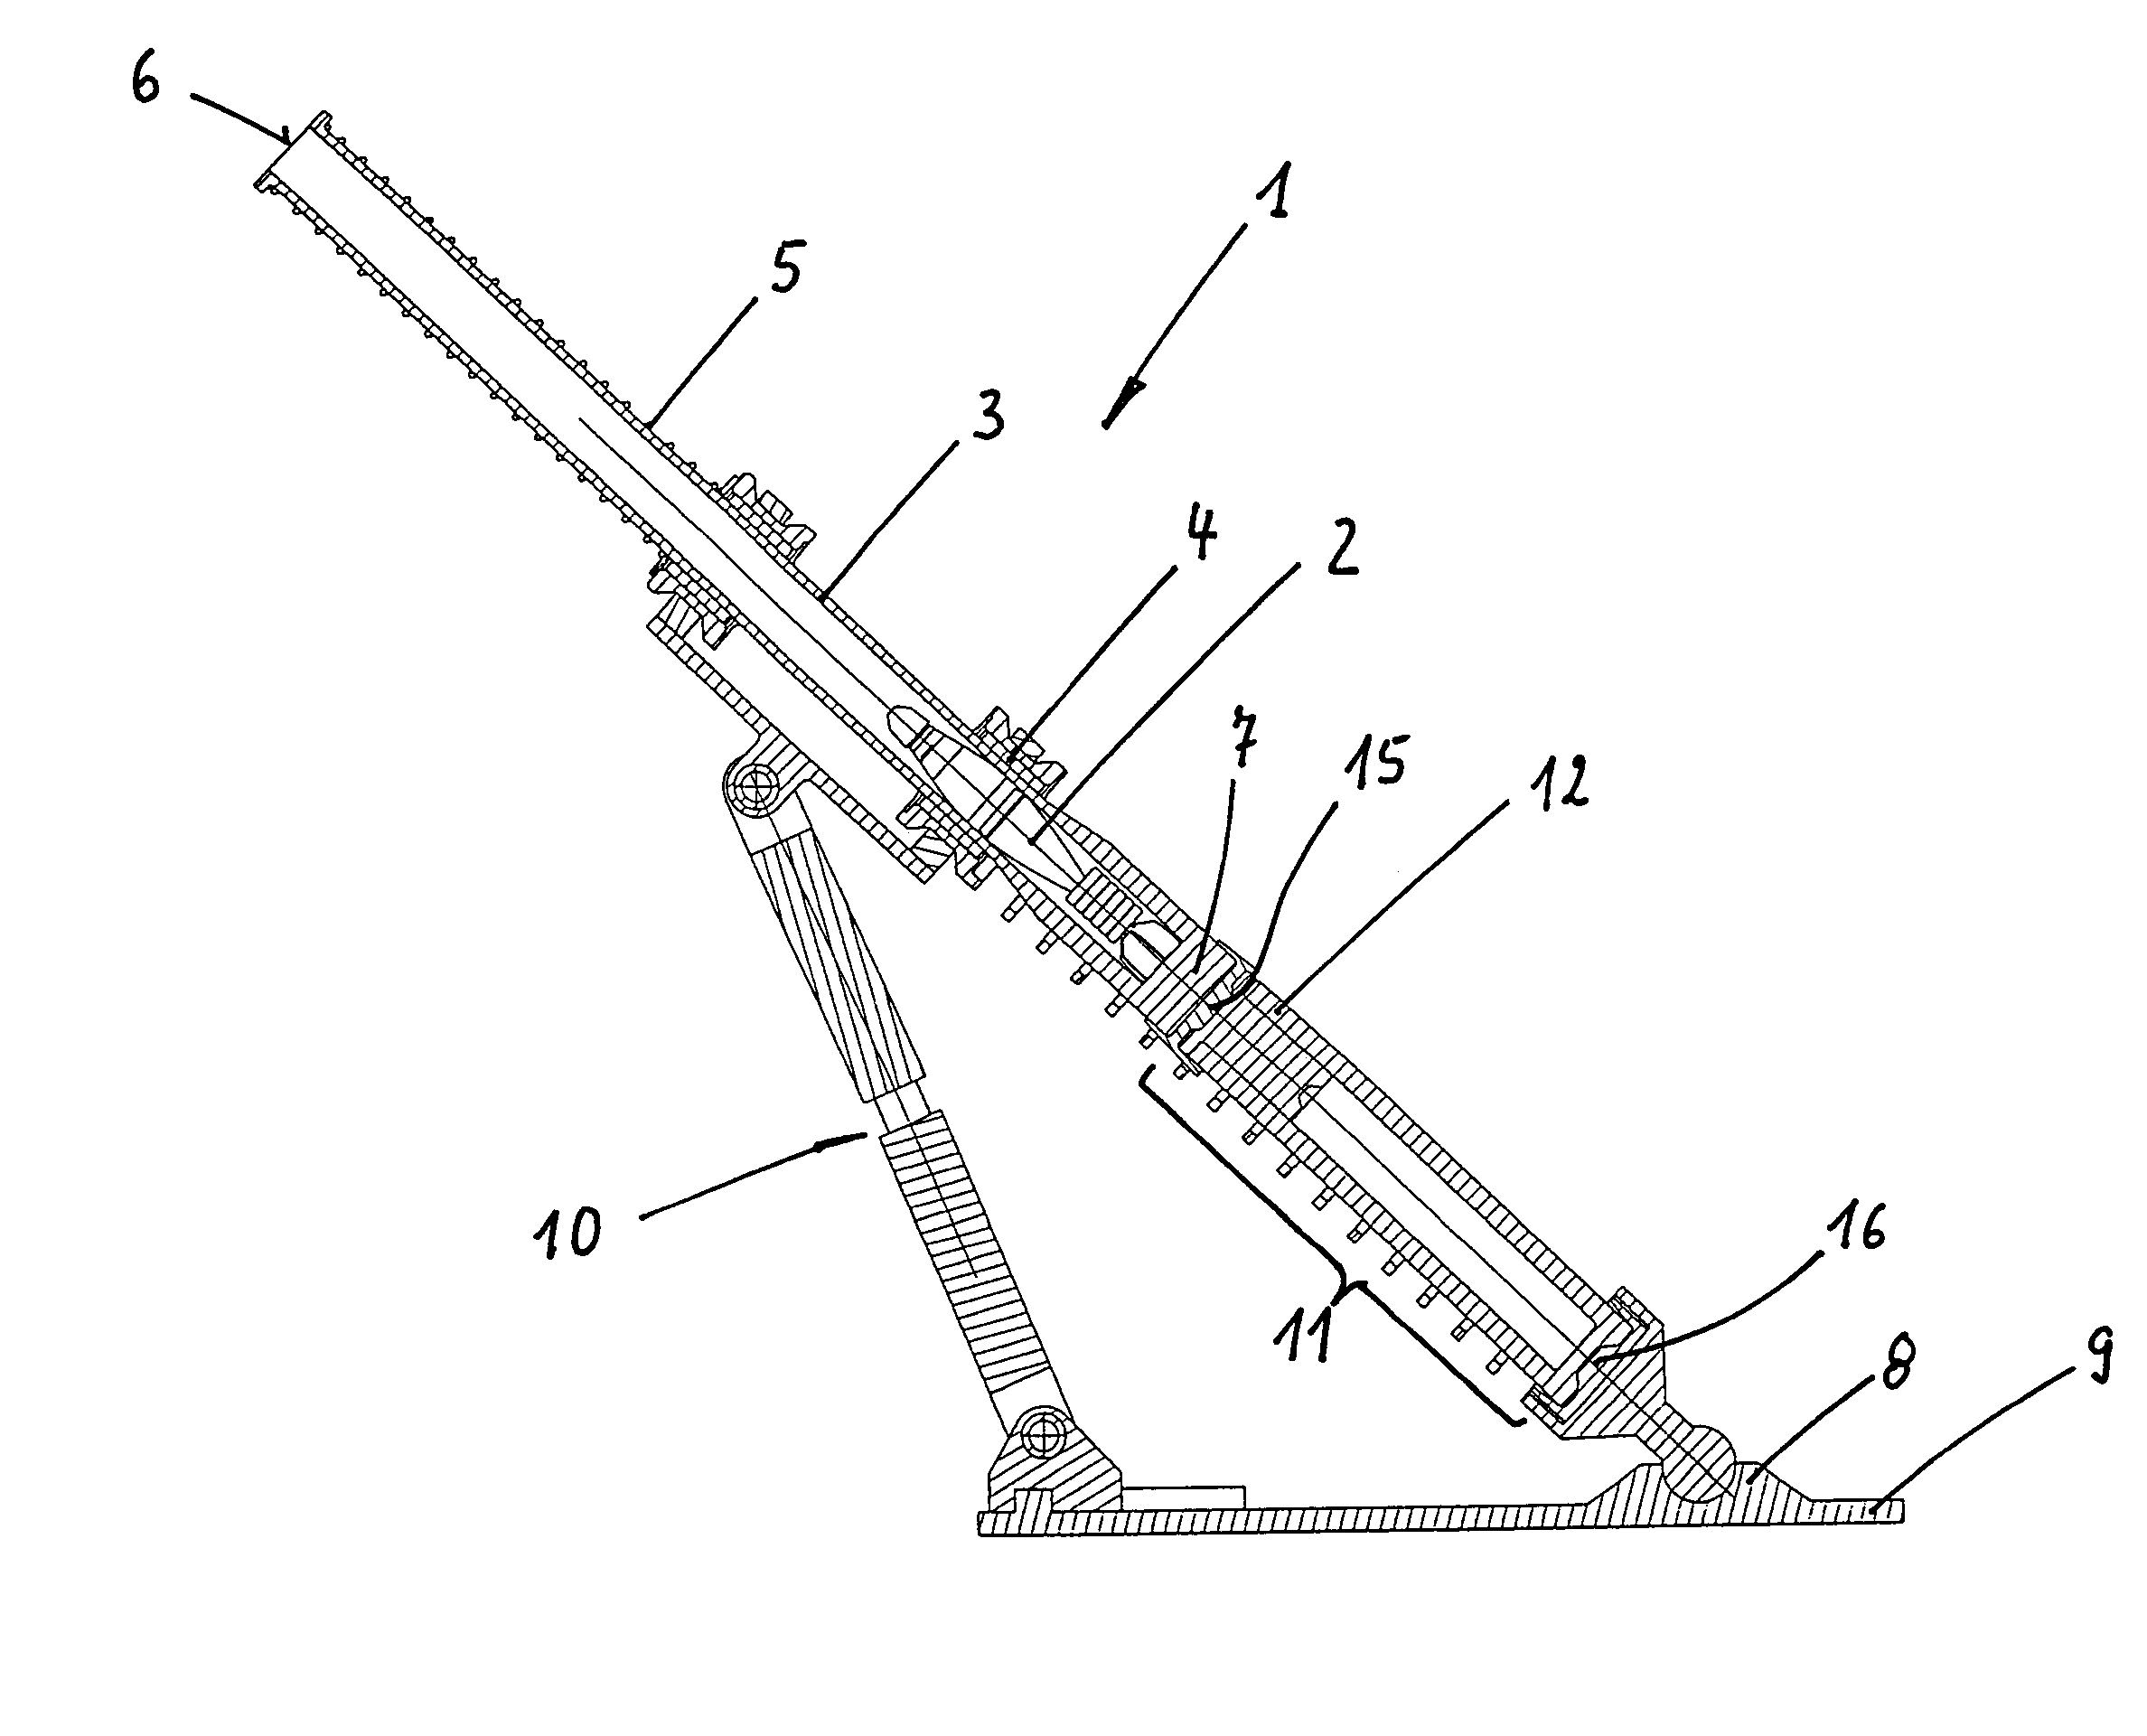 Weapon with recoil and braking device, damping this recoil